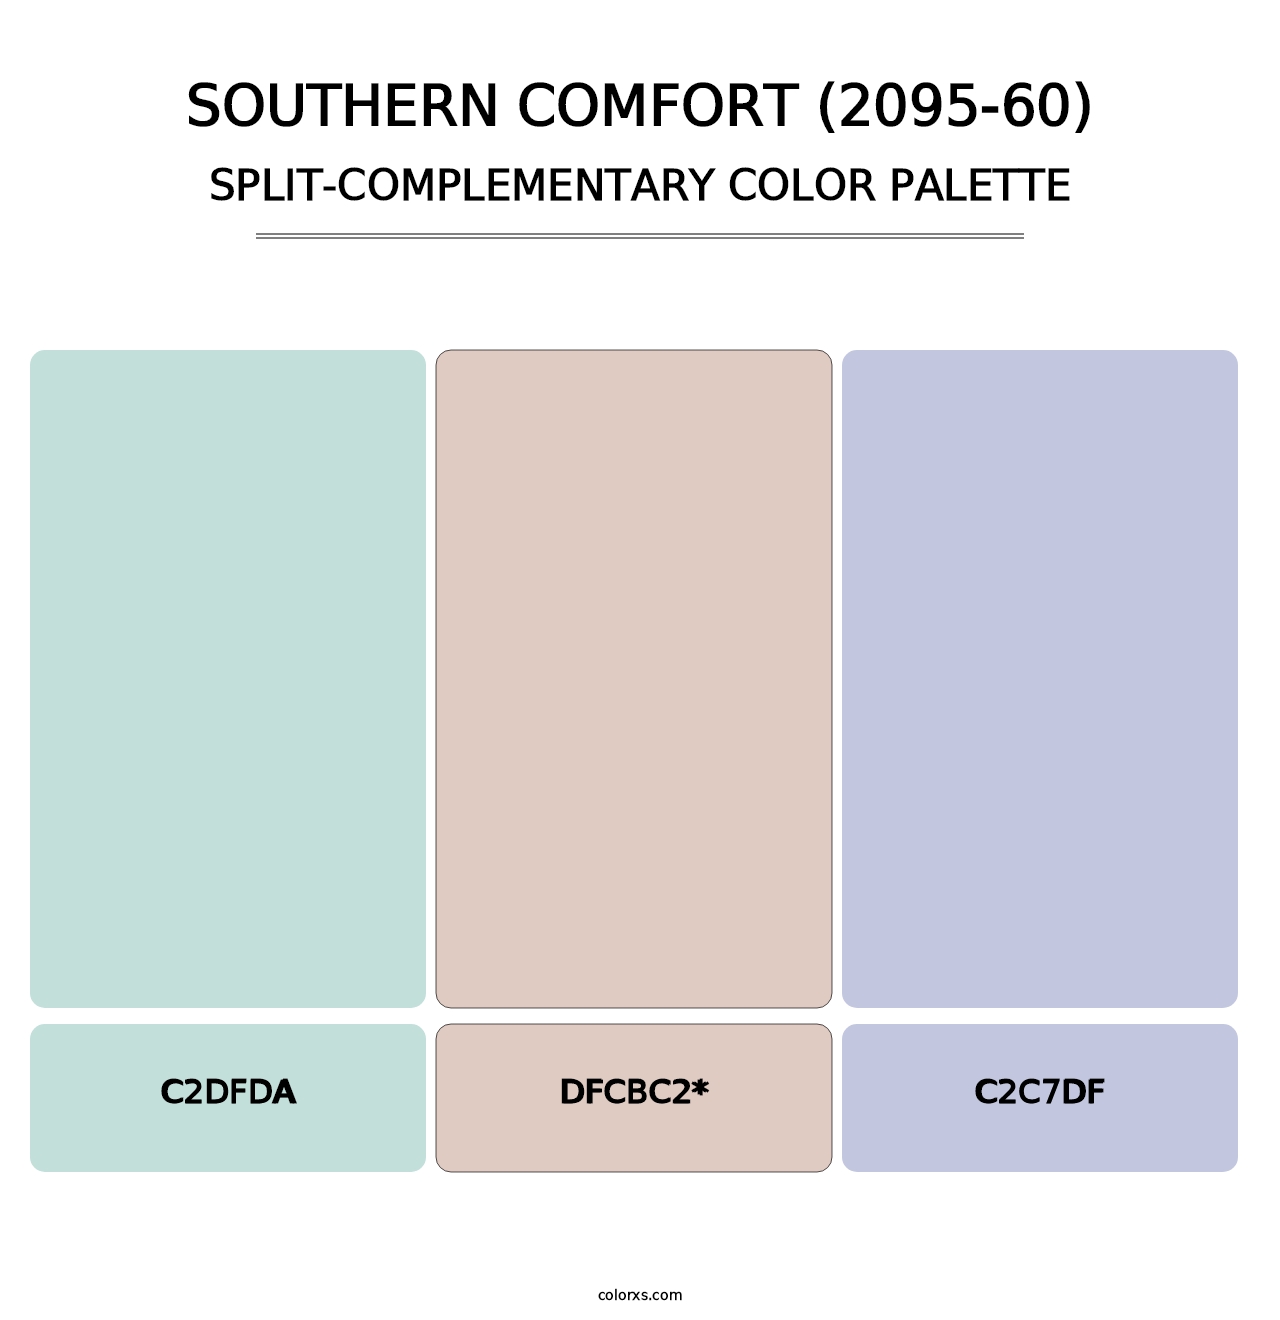 Southern Comfort (2095-60) - Split-Complementary Color Palette